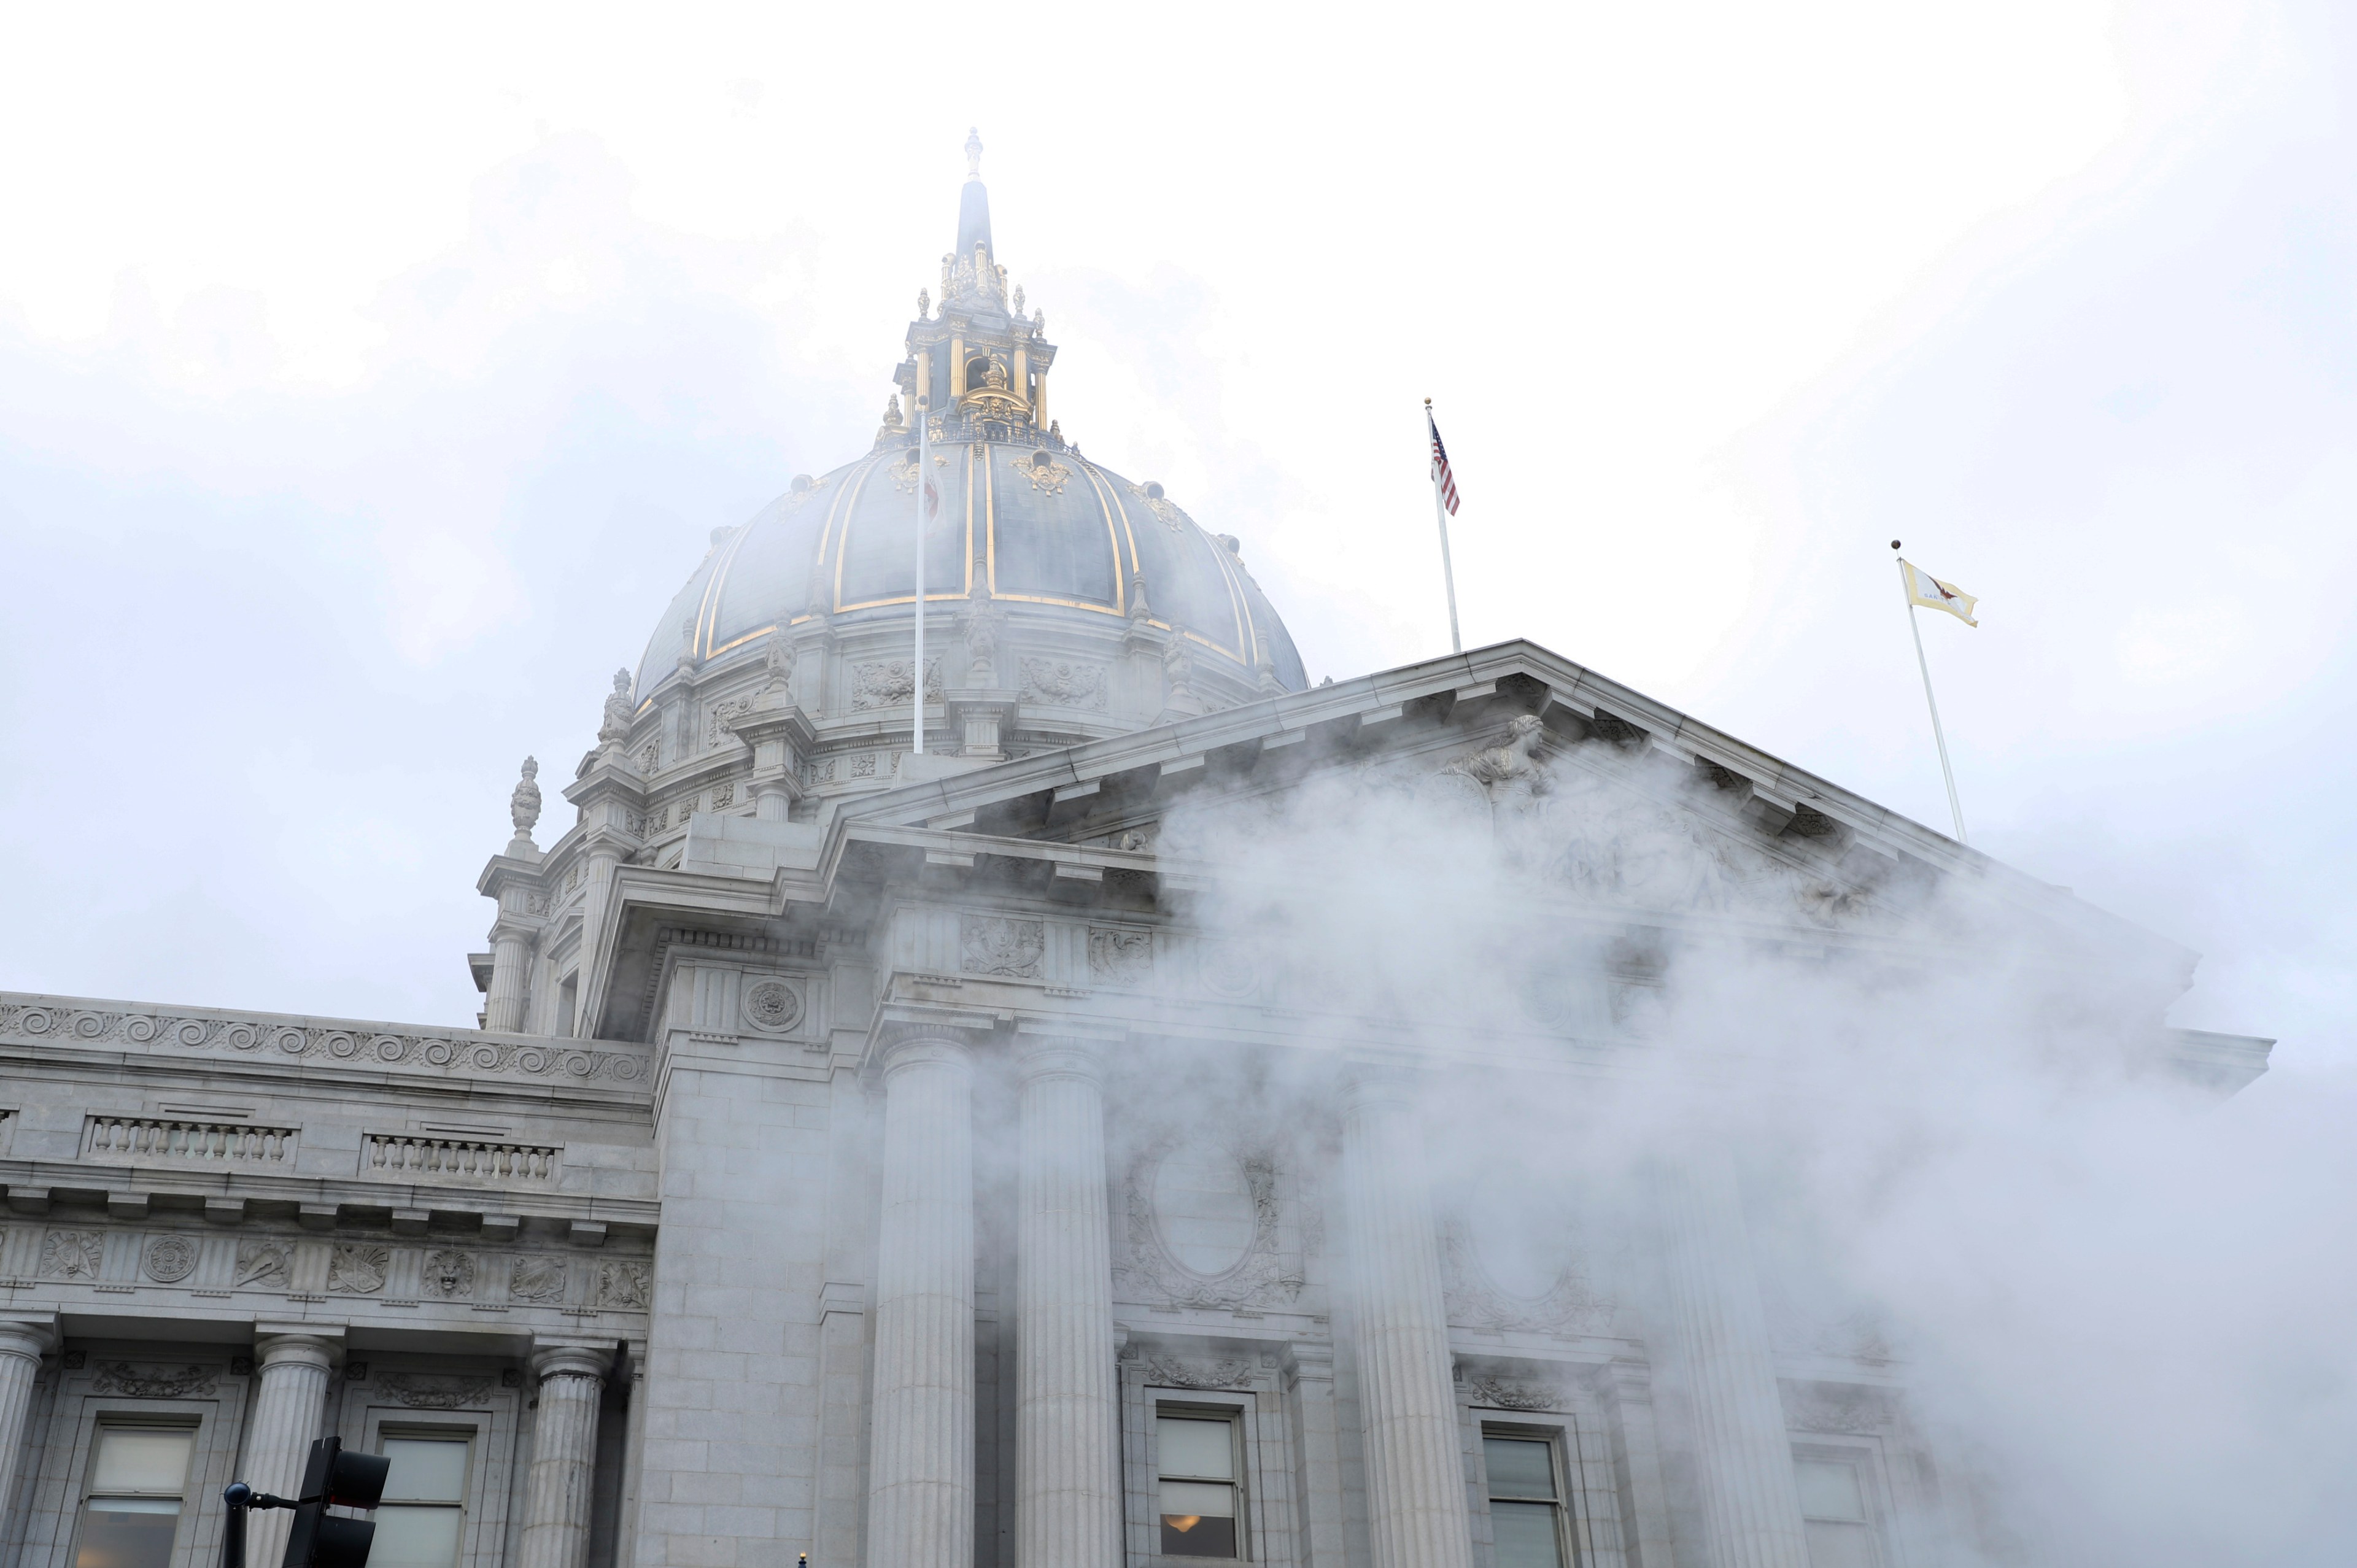 Steam rises from the bottom of the photo with San Francisco's City Hall in the background